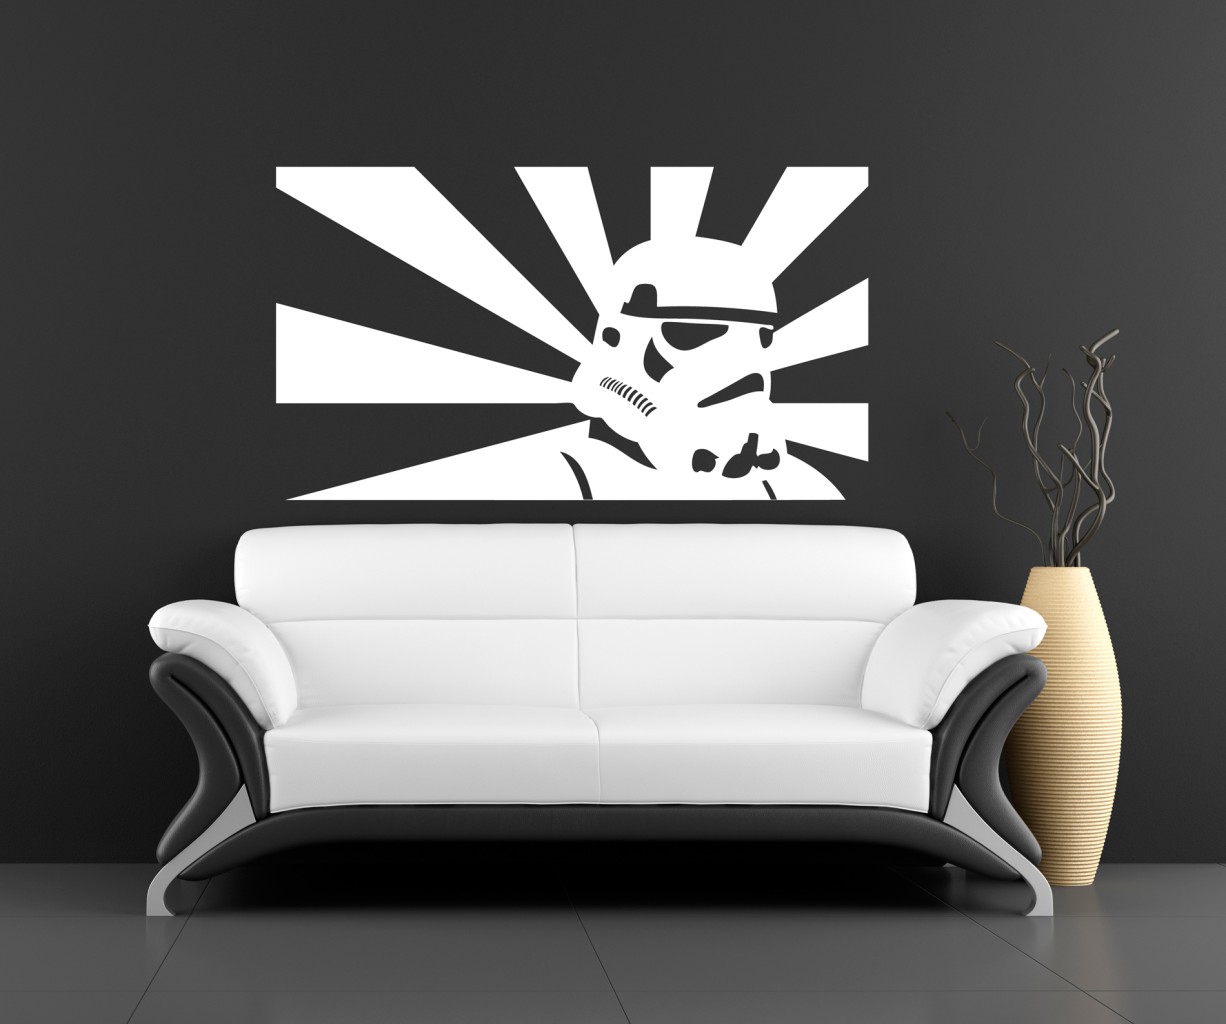 If you're going for a minimalist Star Wars design, all it takes is a fresh looking leather couch, and a bold Star Wars art piece.